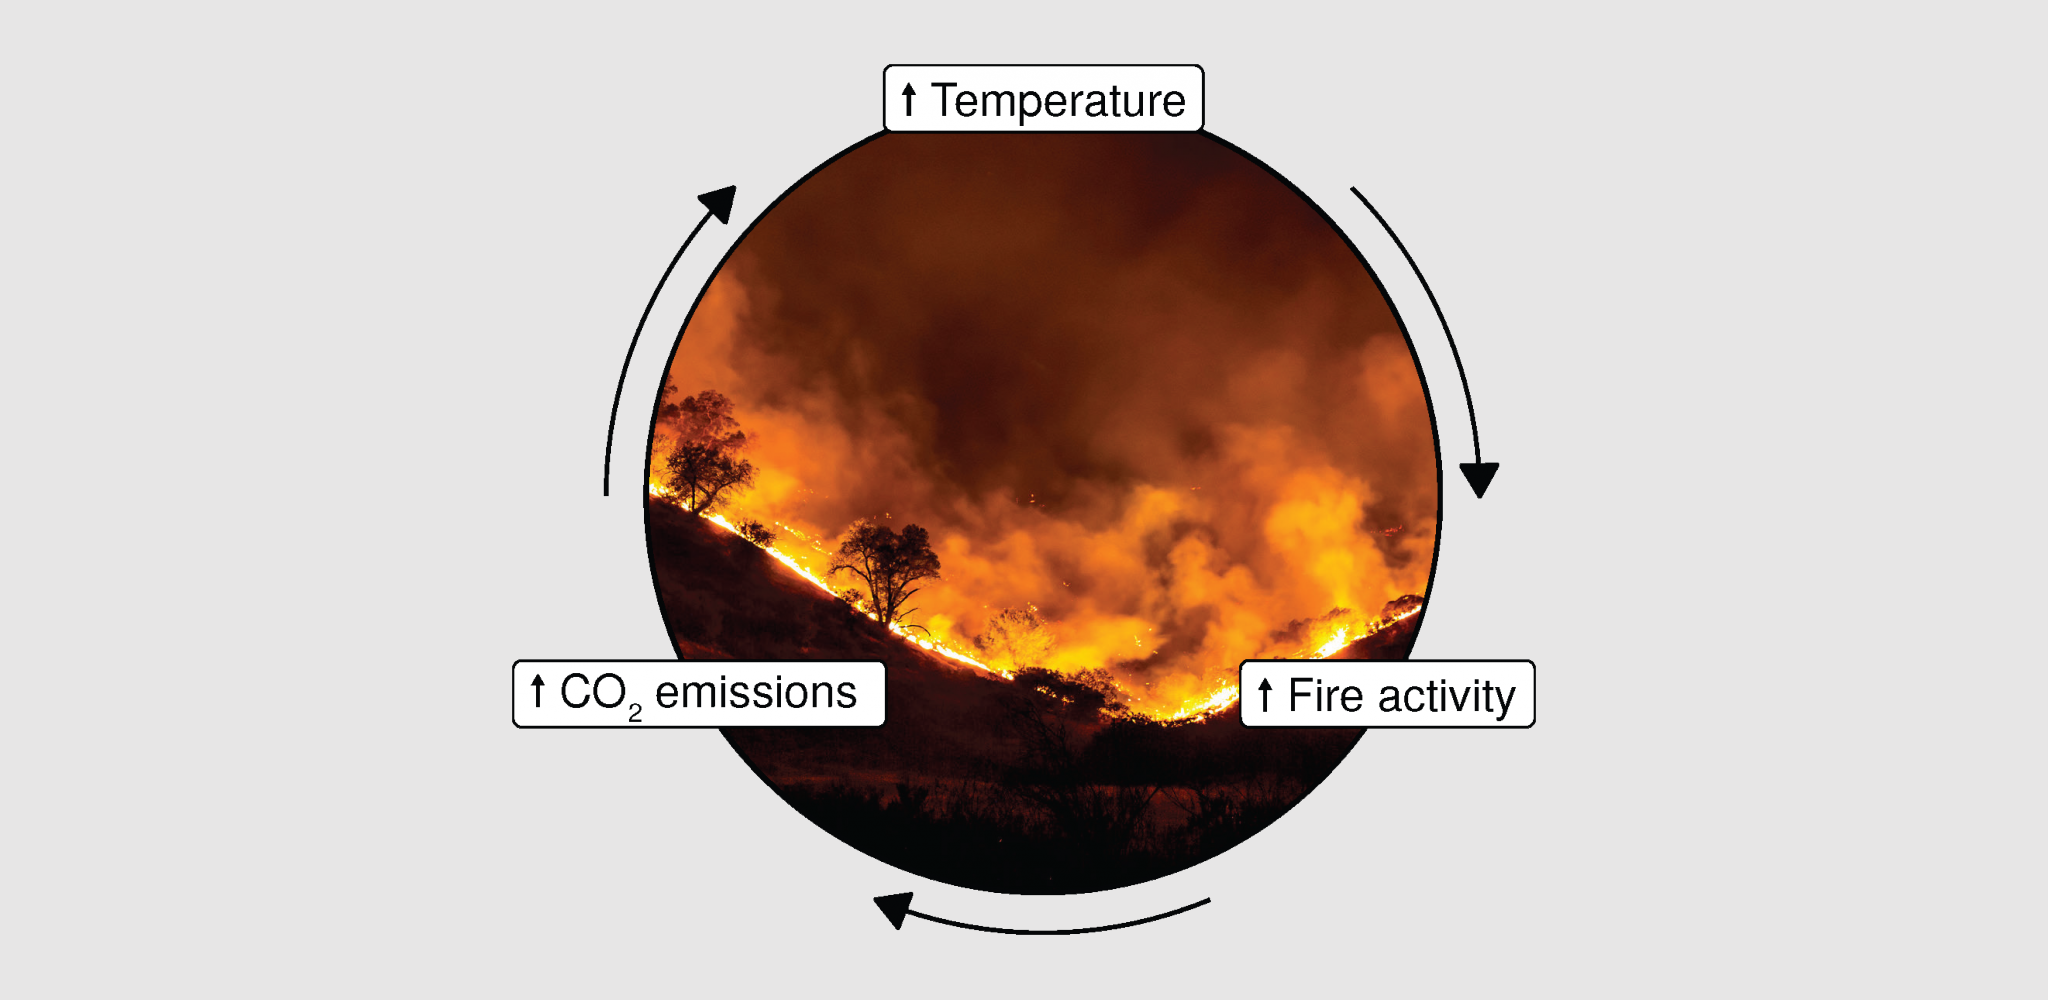 Wildfire feedback cycle: As fire activity increases, CO2 emissions increase, which increases temperature, which increases fire activity ...